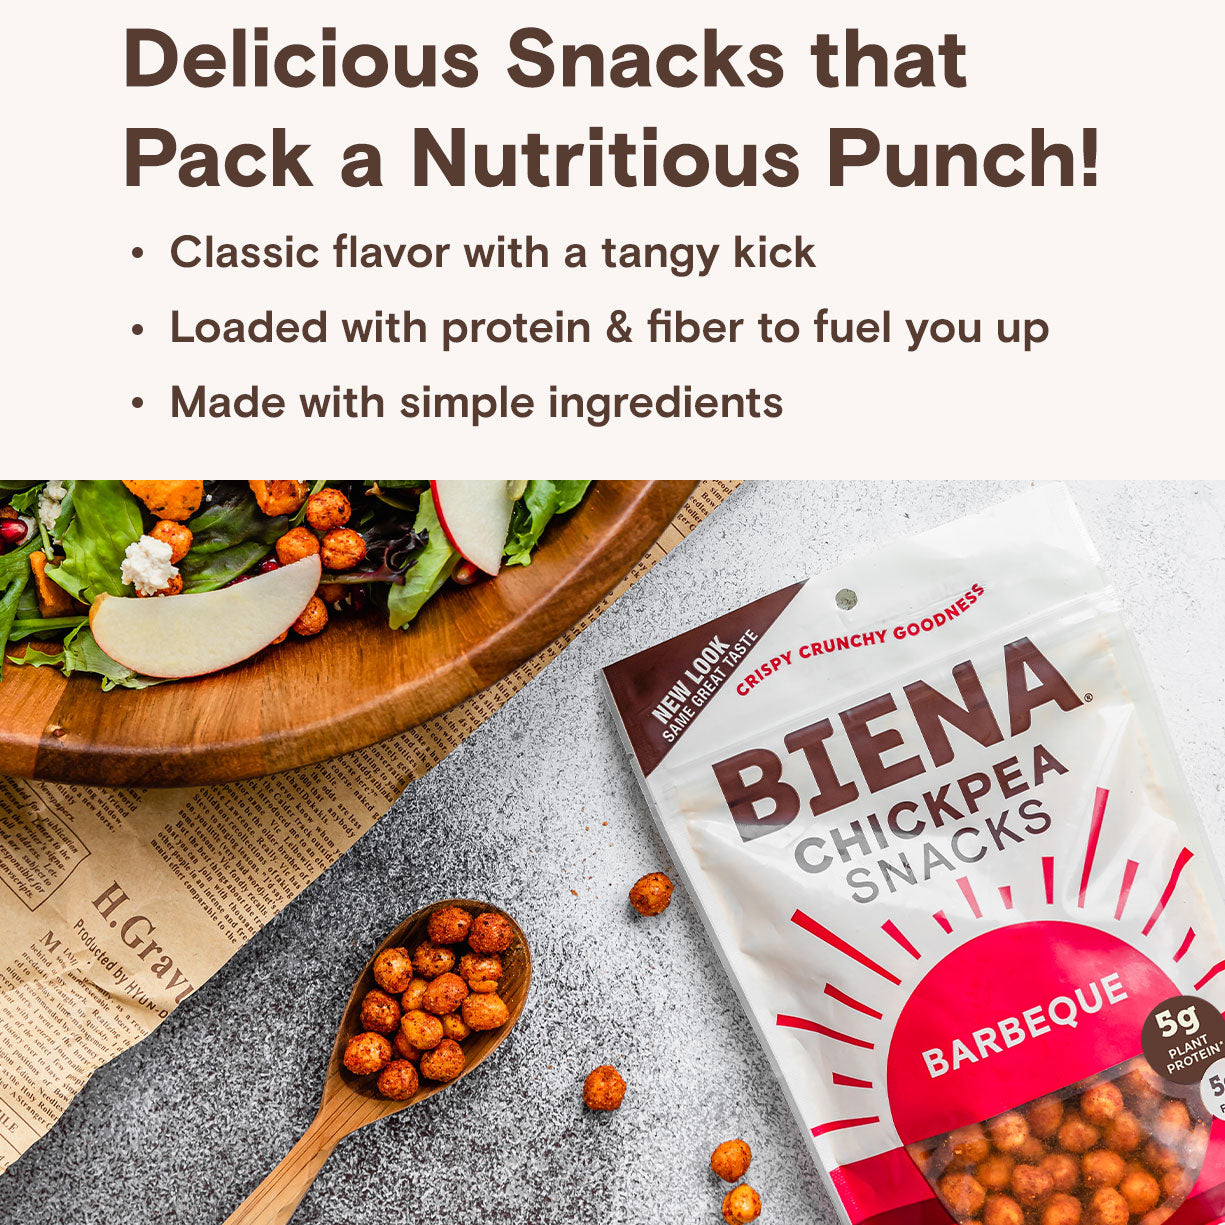 Biena Barbecue Chickpea Snacks that pack a nutritious punch